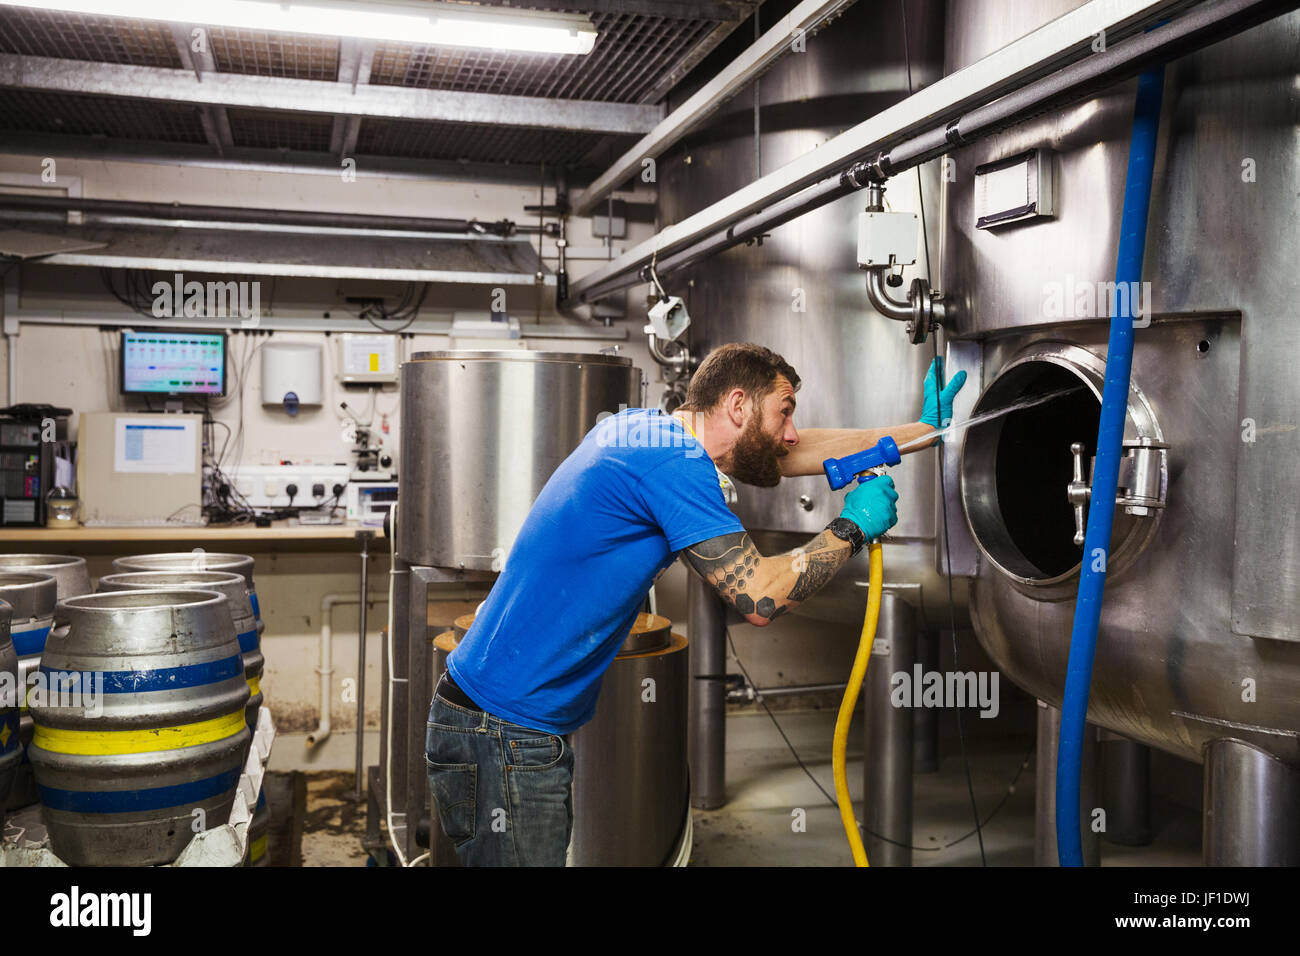 Man working in a brewery, cleaning inside of a large stainless steel kettle with a high pressure washer. Stock Photo